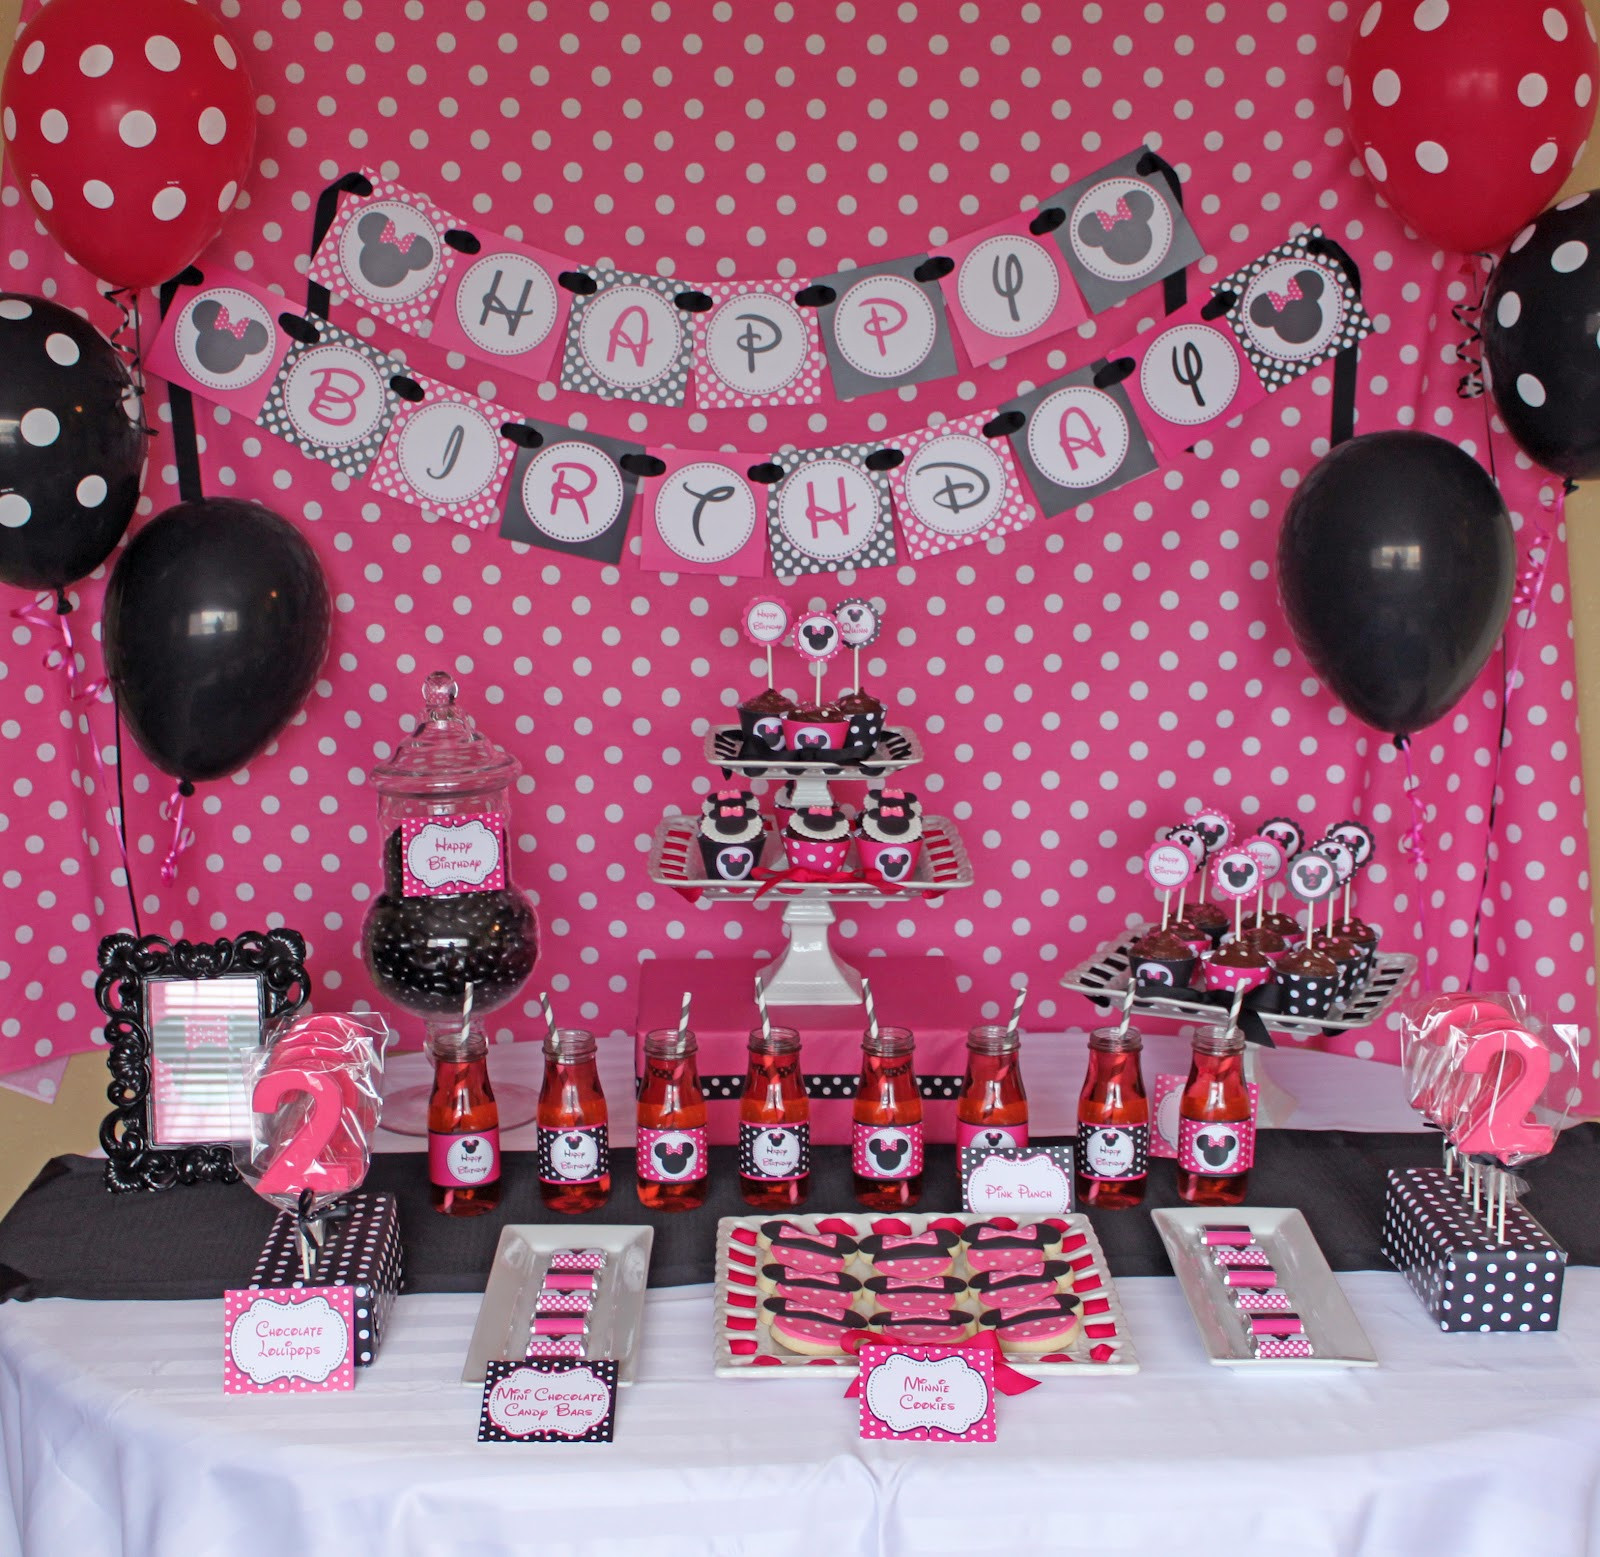 Minnie Mouse First Birthday Decorations
 Minnie Mouse Party Decorations